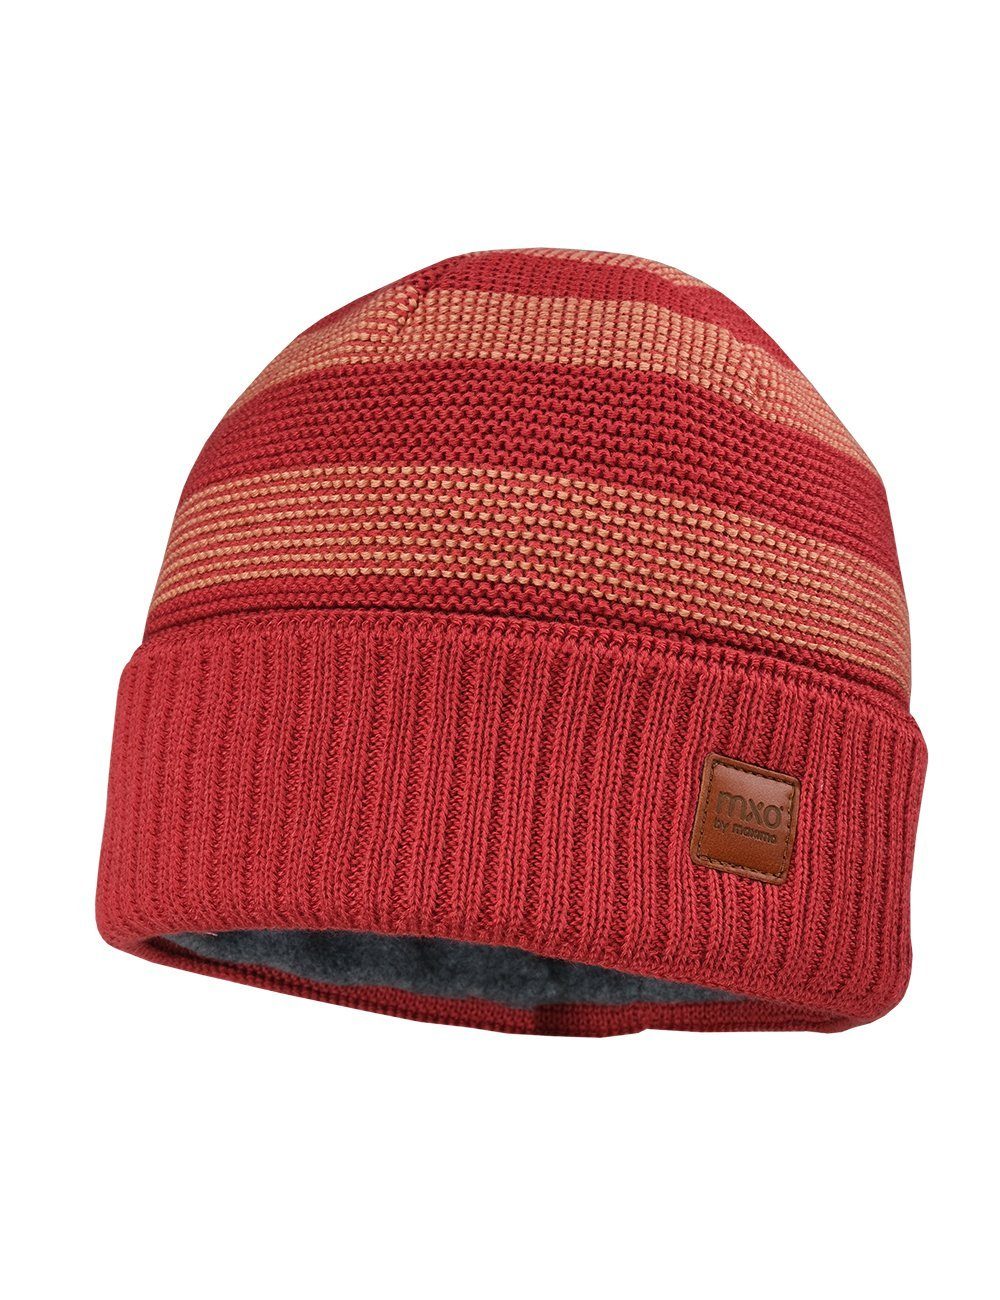 Strickmütze GOTS rosewood GOTS Made Germany MINI-Beanie, Umschlag Futter MAXIMO LL, Organi in